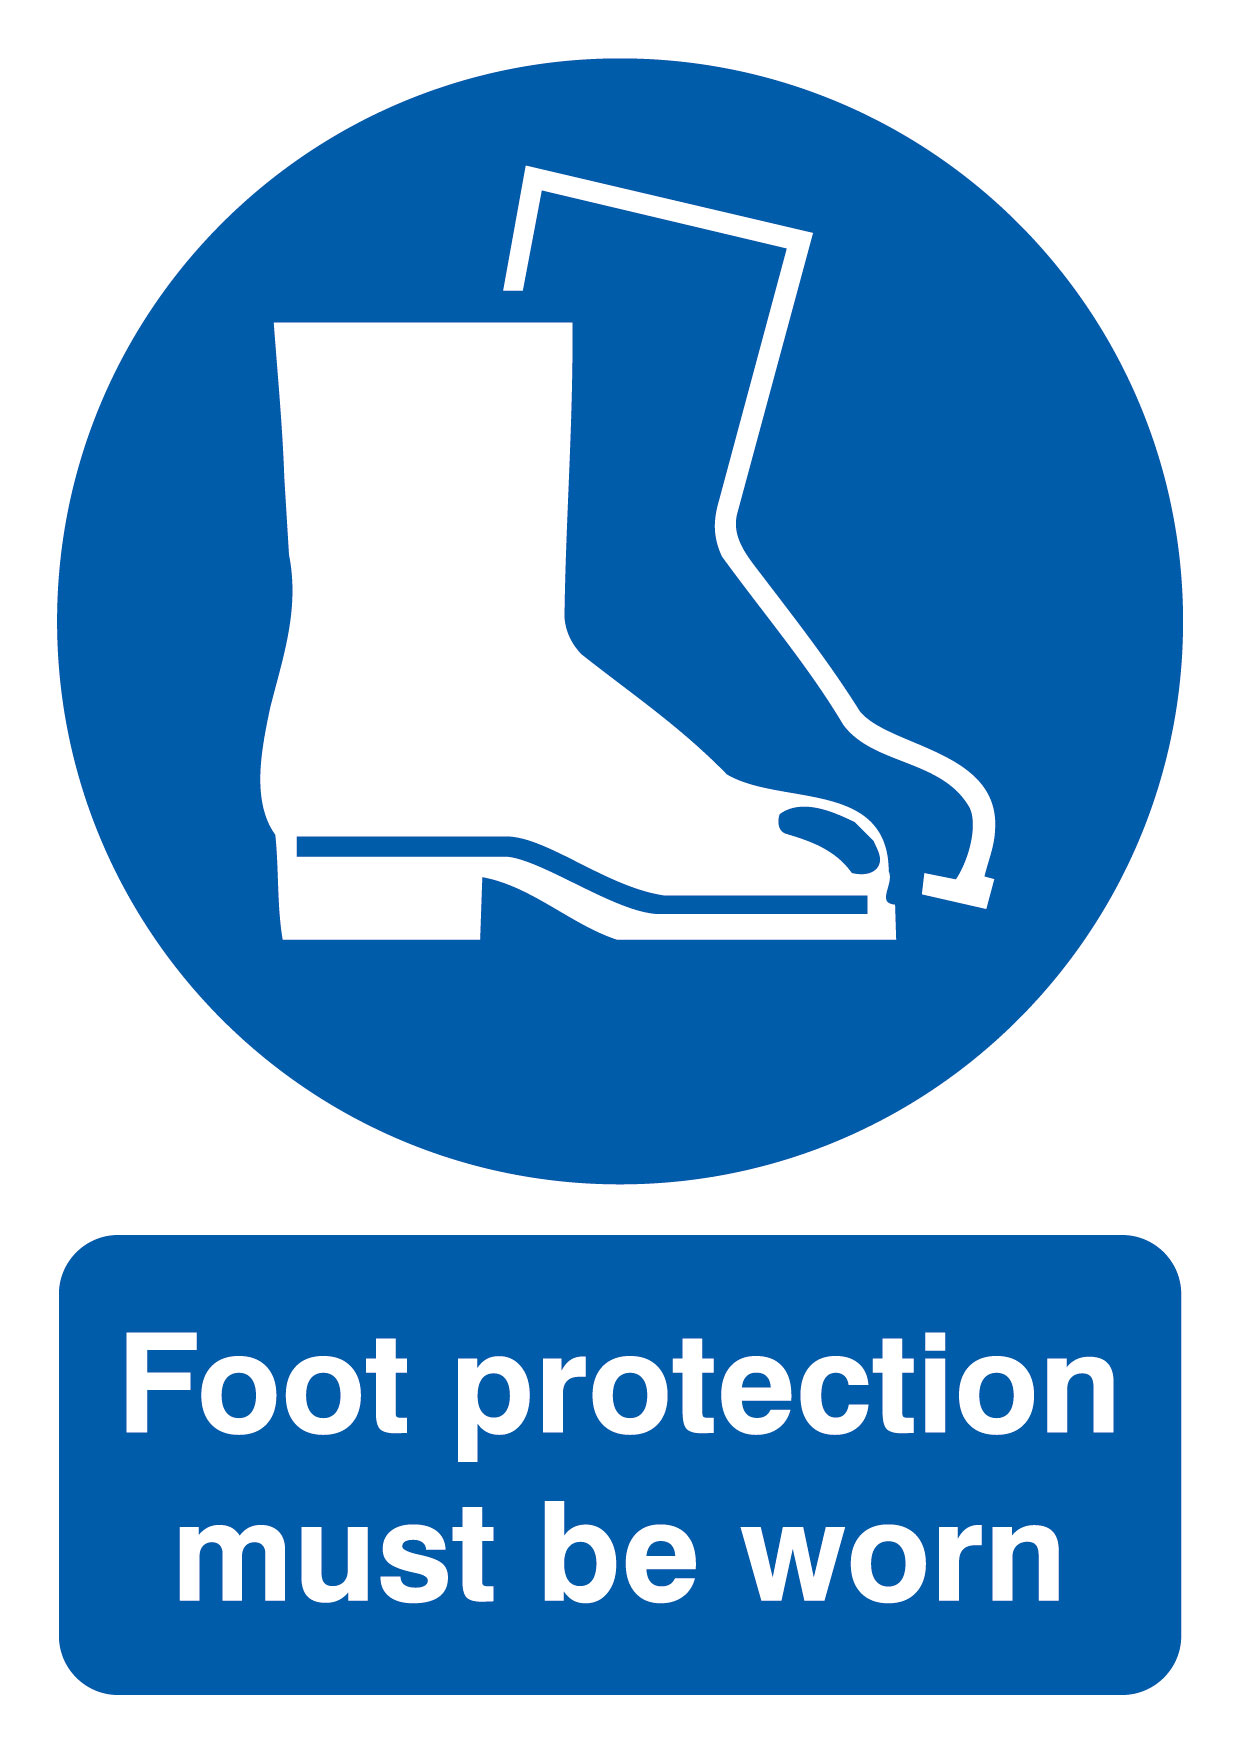 600 x 450 Foot protection must be worn 1.2mm rigid polypropylene sign